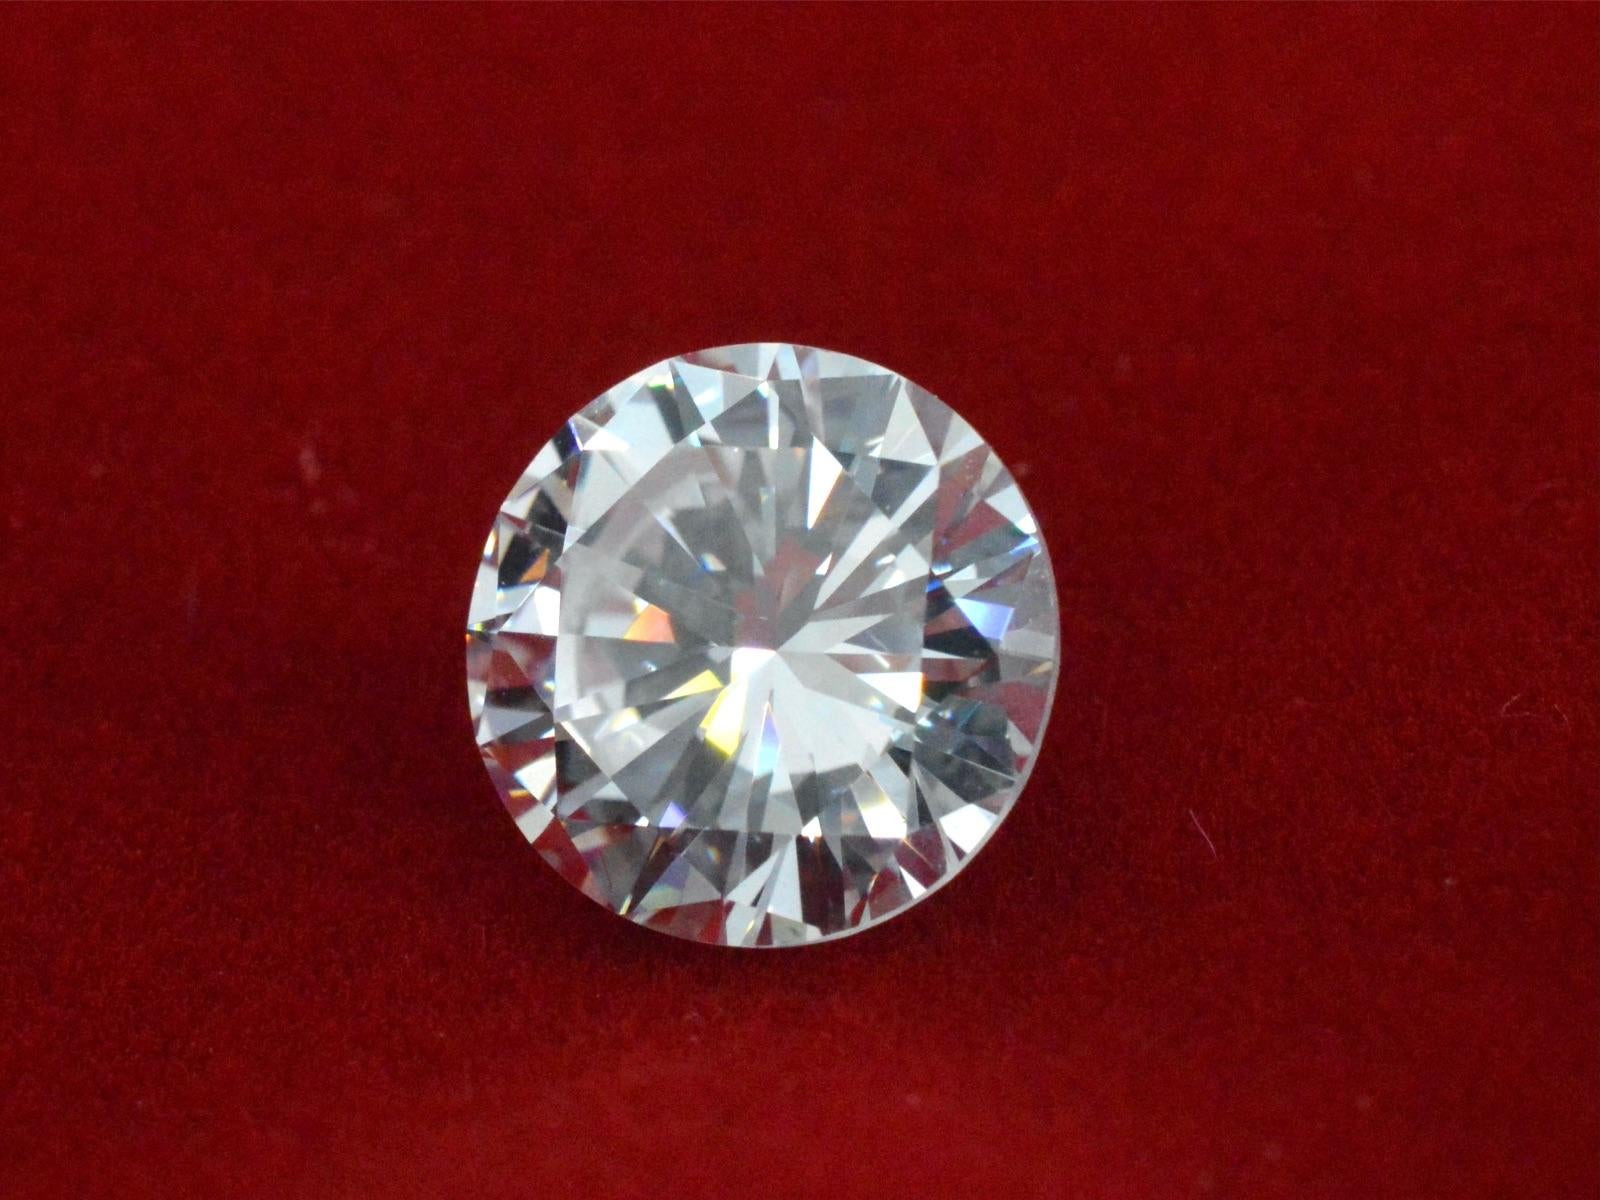 Quantity: 1
 Product Name: 0.77 Carat Natural Starcut Diamond with Laser Engraved
 Brand: Starcut
 Cut shape: Brilliant cut modified
 Weight: 0.77 carats
 Color: G
 Purity: VVS2
 Packaging: IGI sealed
 Certificate number: 533204198.
Retail value: €